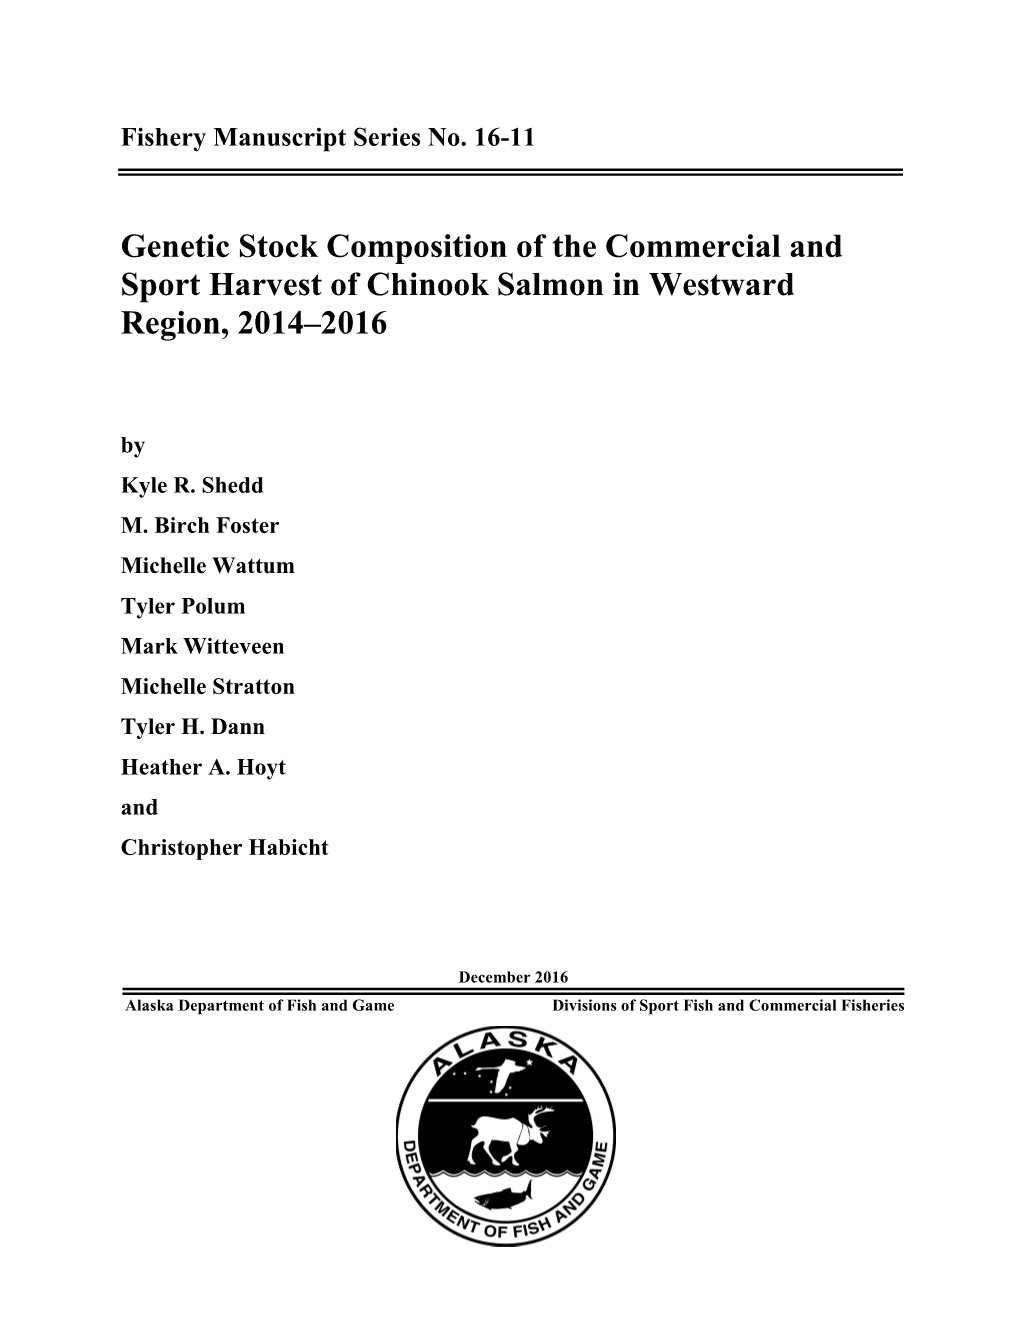 Genetic Stock Composition of the Commercial and Sport Harvest of Chinook Salmon in Westward Region, 2014–2016